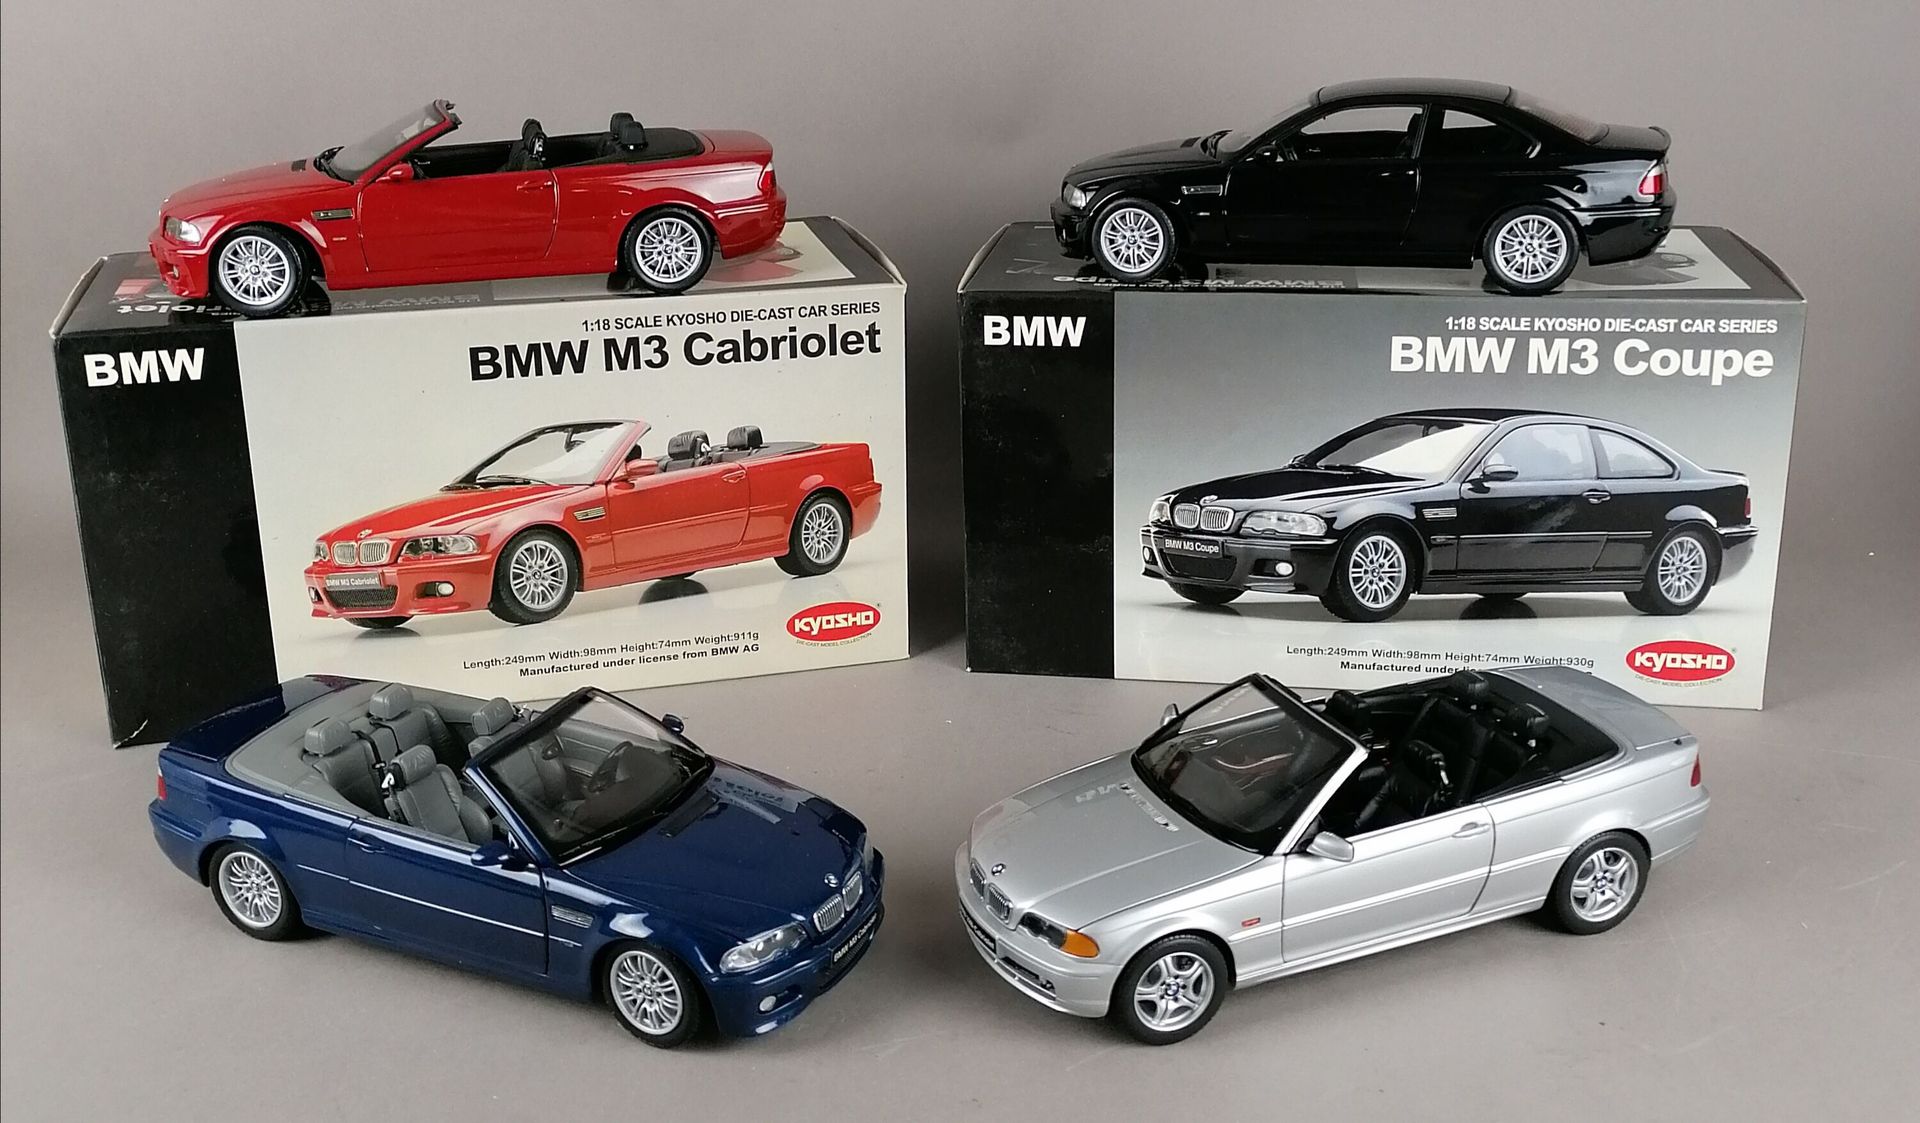 Null KYOSHO - QUATTRO BMW in scala 1:18:

2x M3 convertibile

1x M3 Coupe

1x 32&hellip;